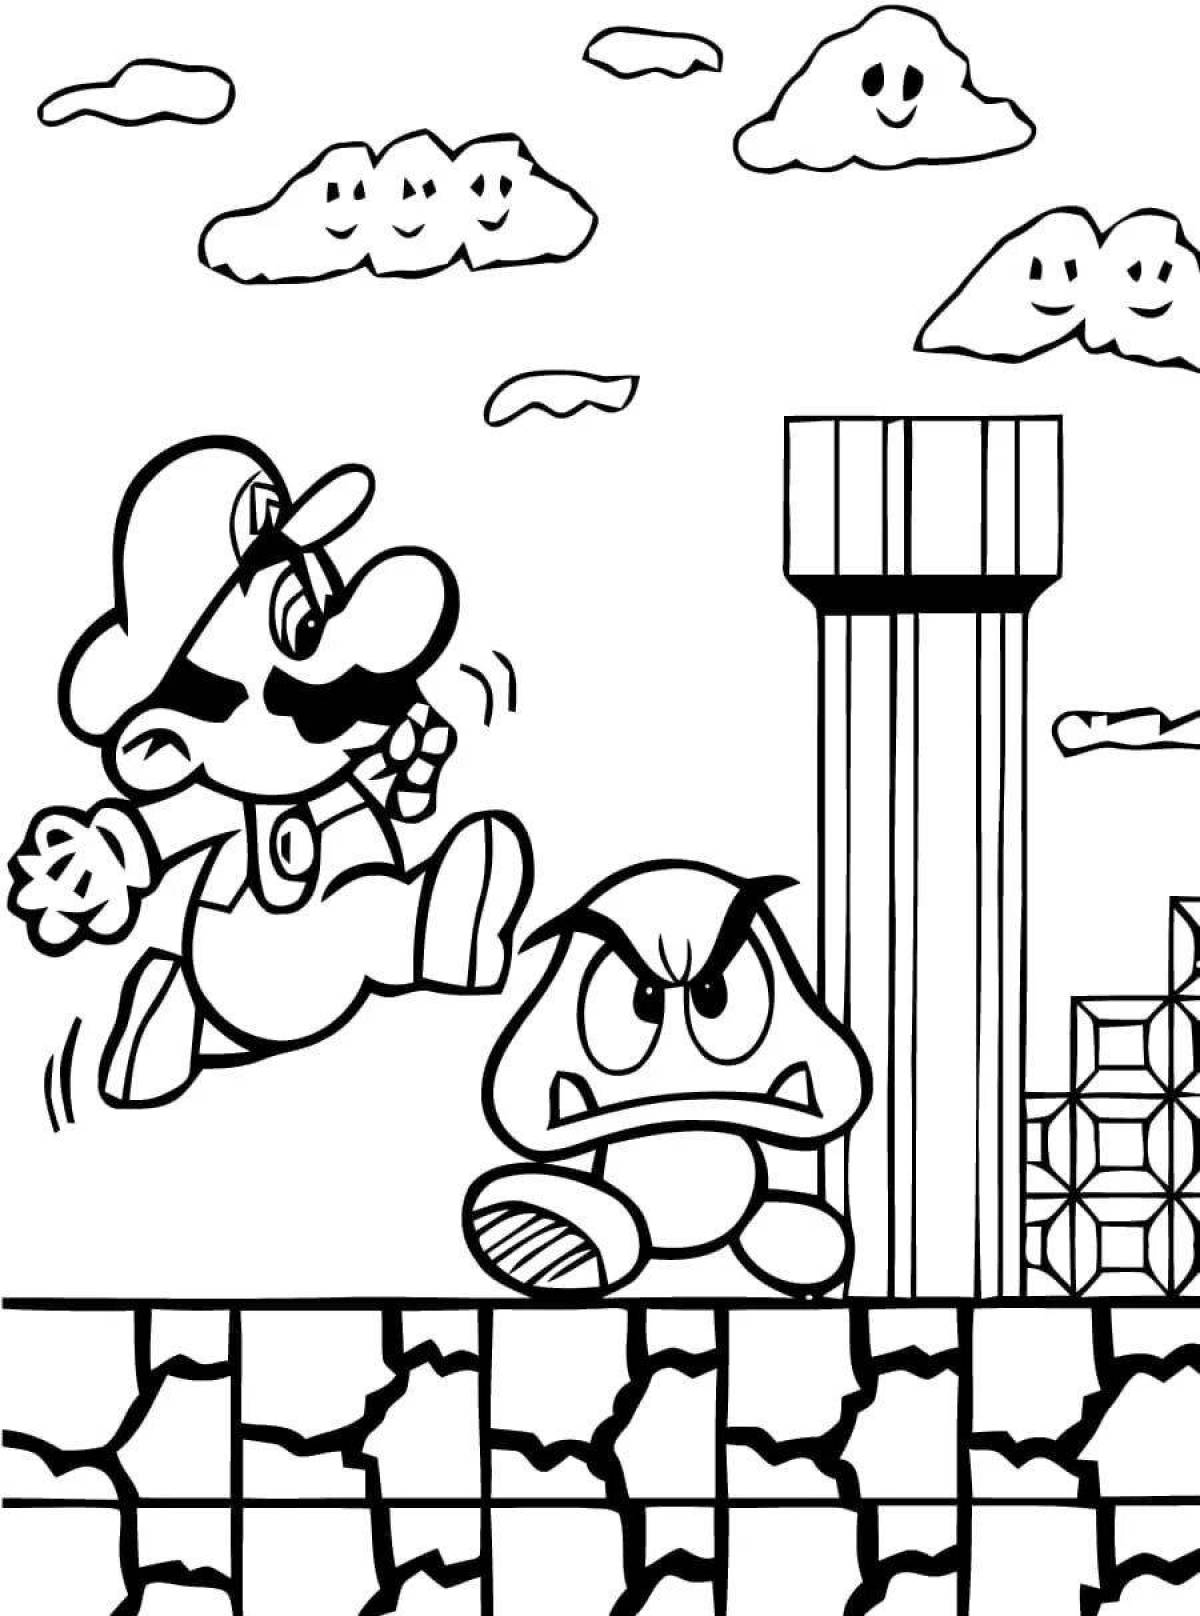 Mario by numbers #10